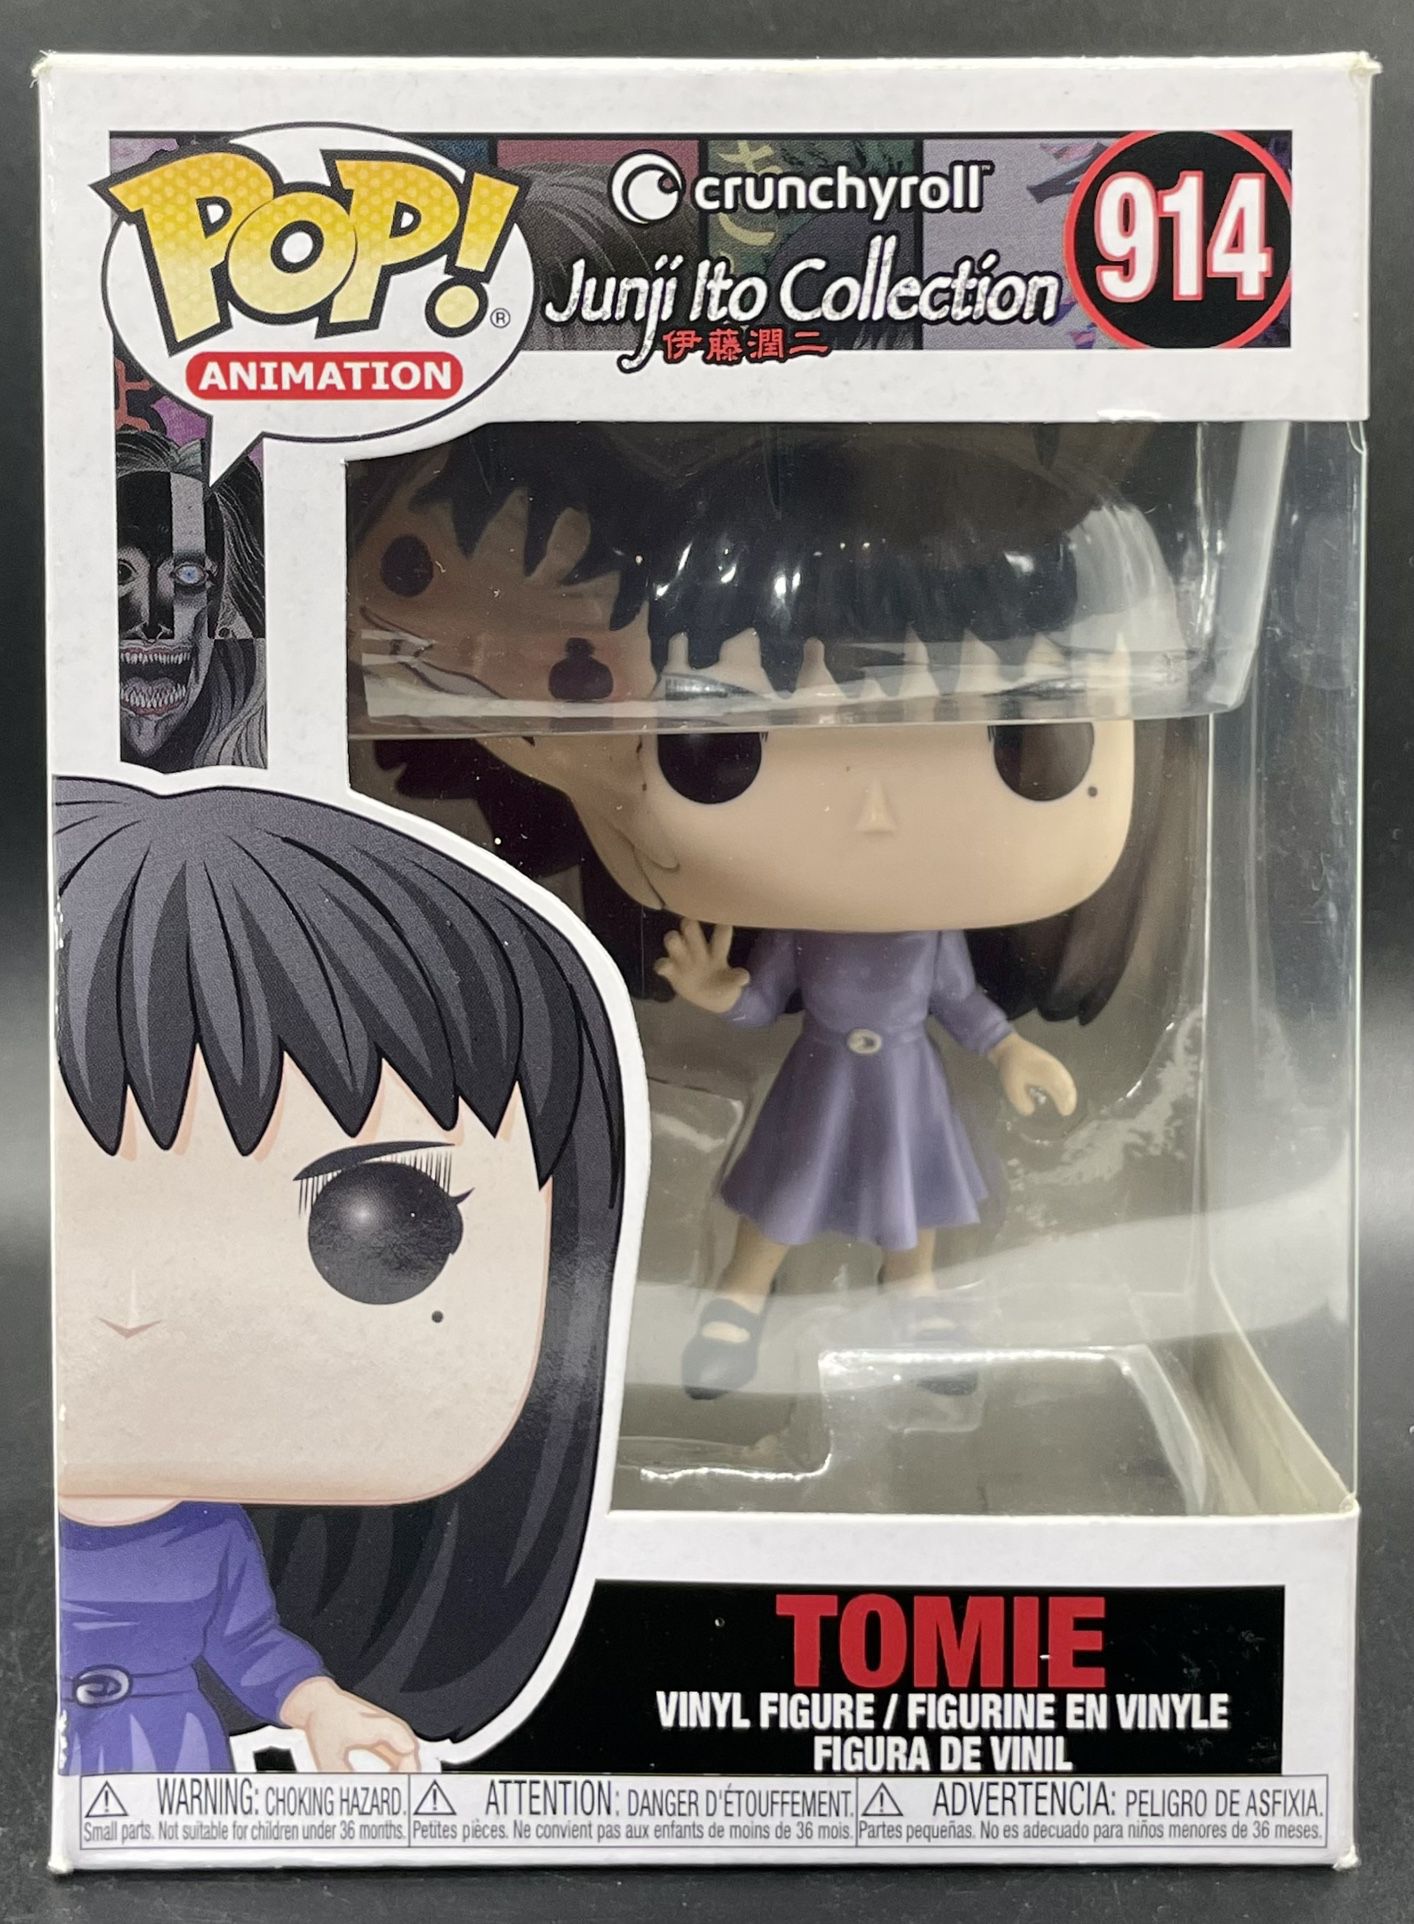 Junji Ito Collection Tomie Funko Pop